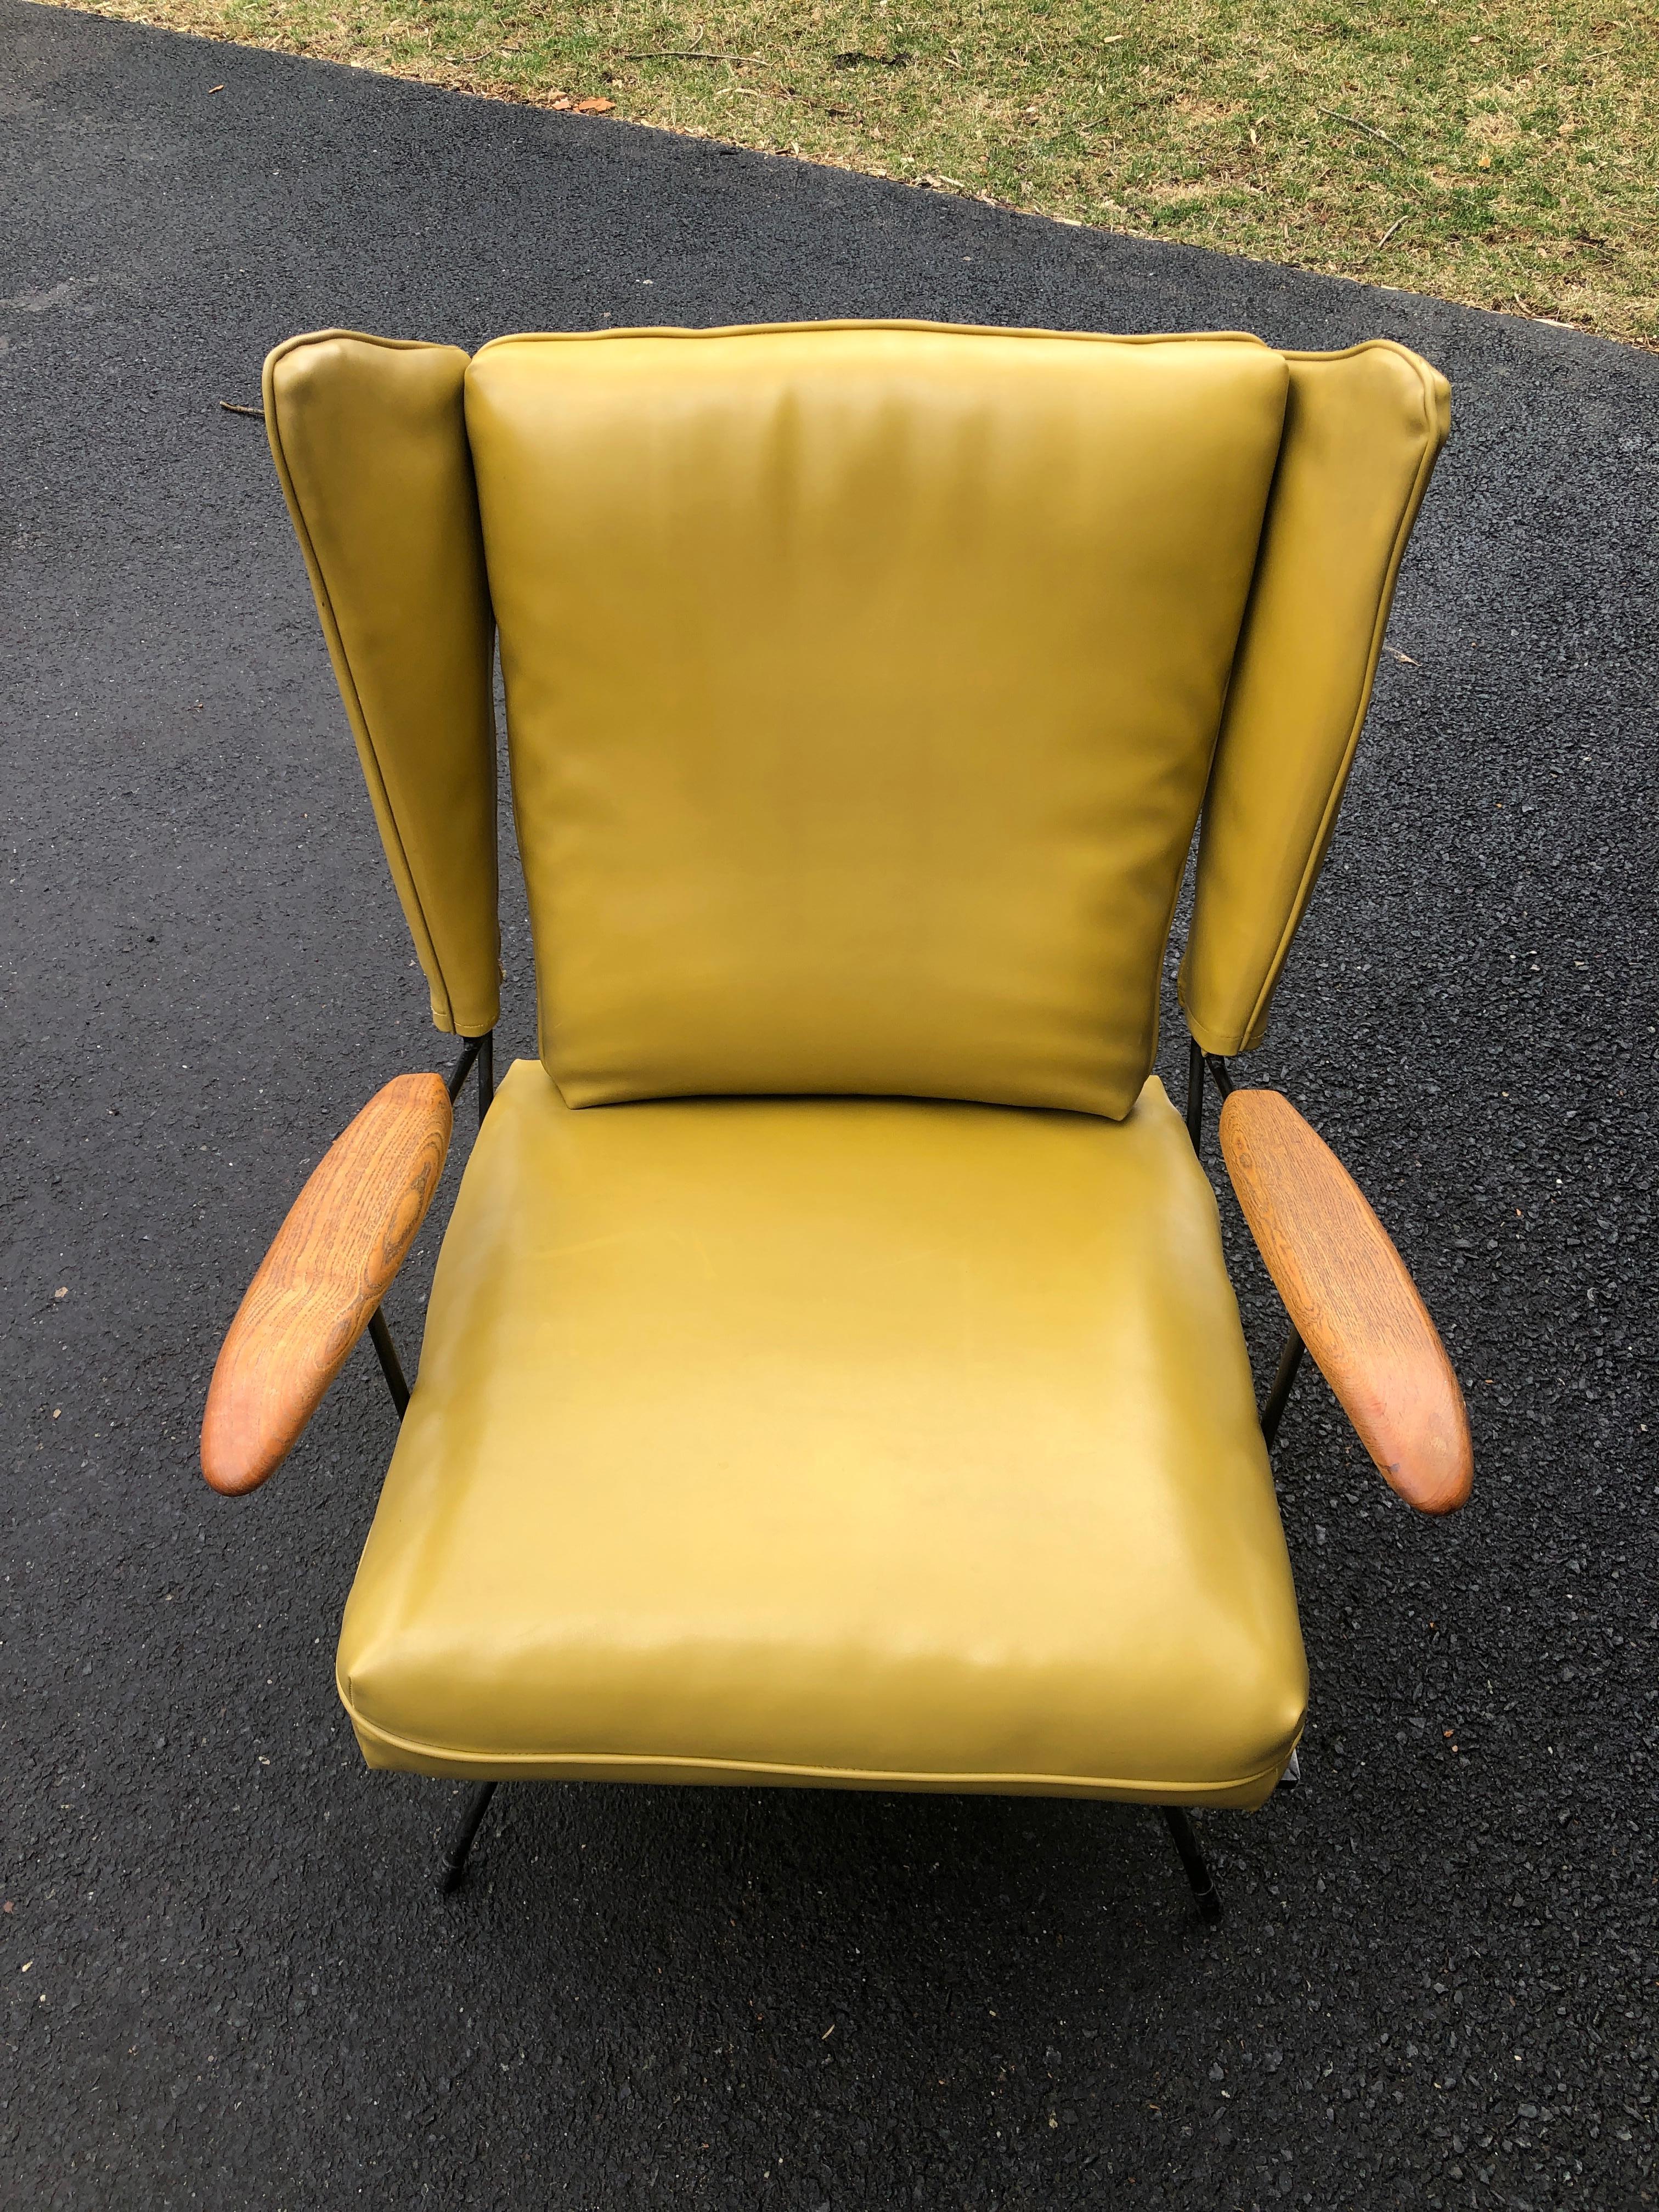 Anodized Adrian Pearsall Wing Chair Selrite Iron Frame For Sale